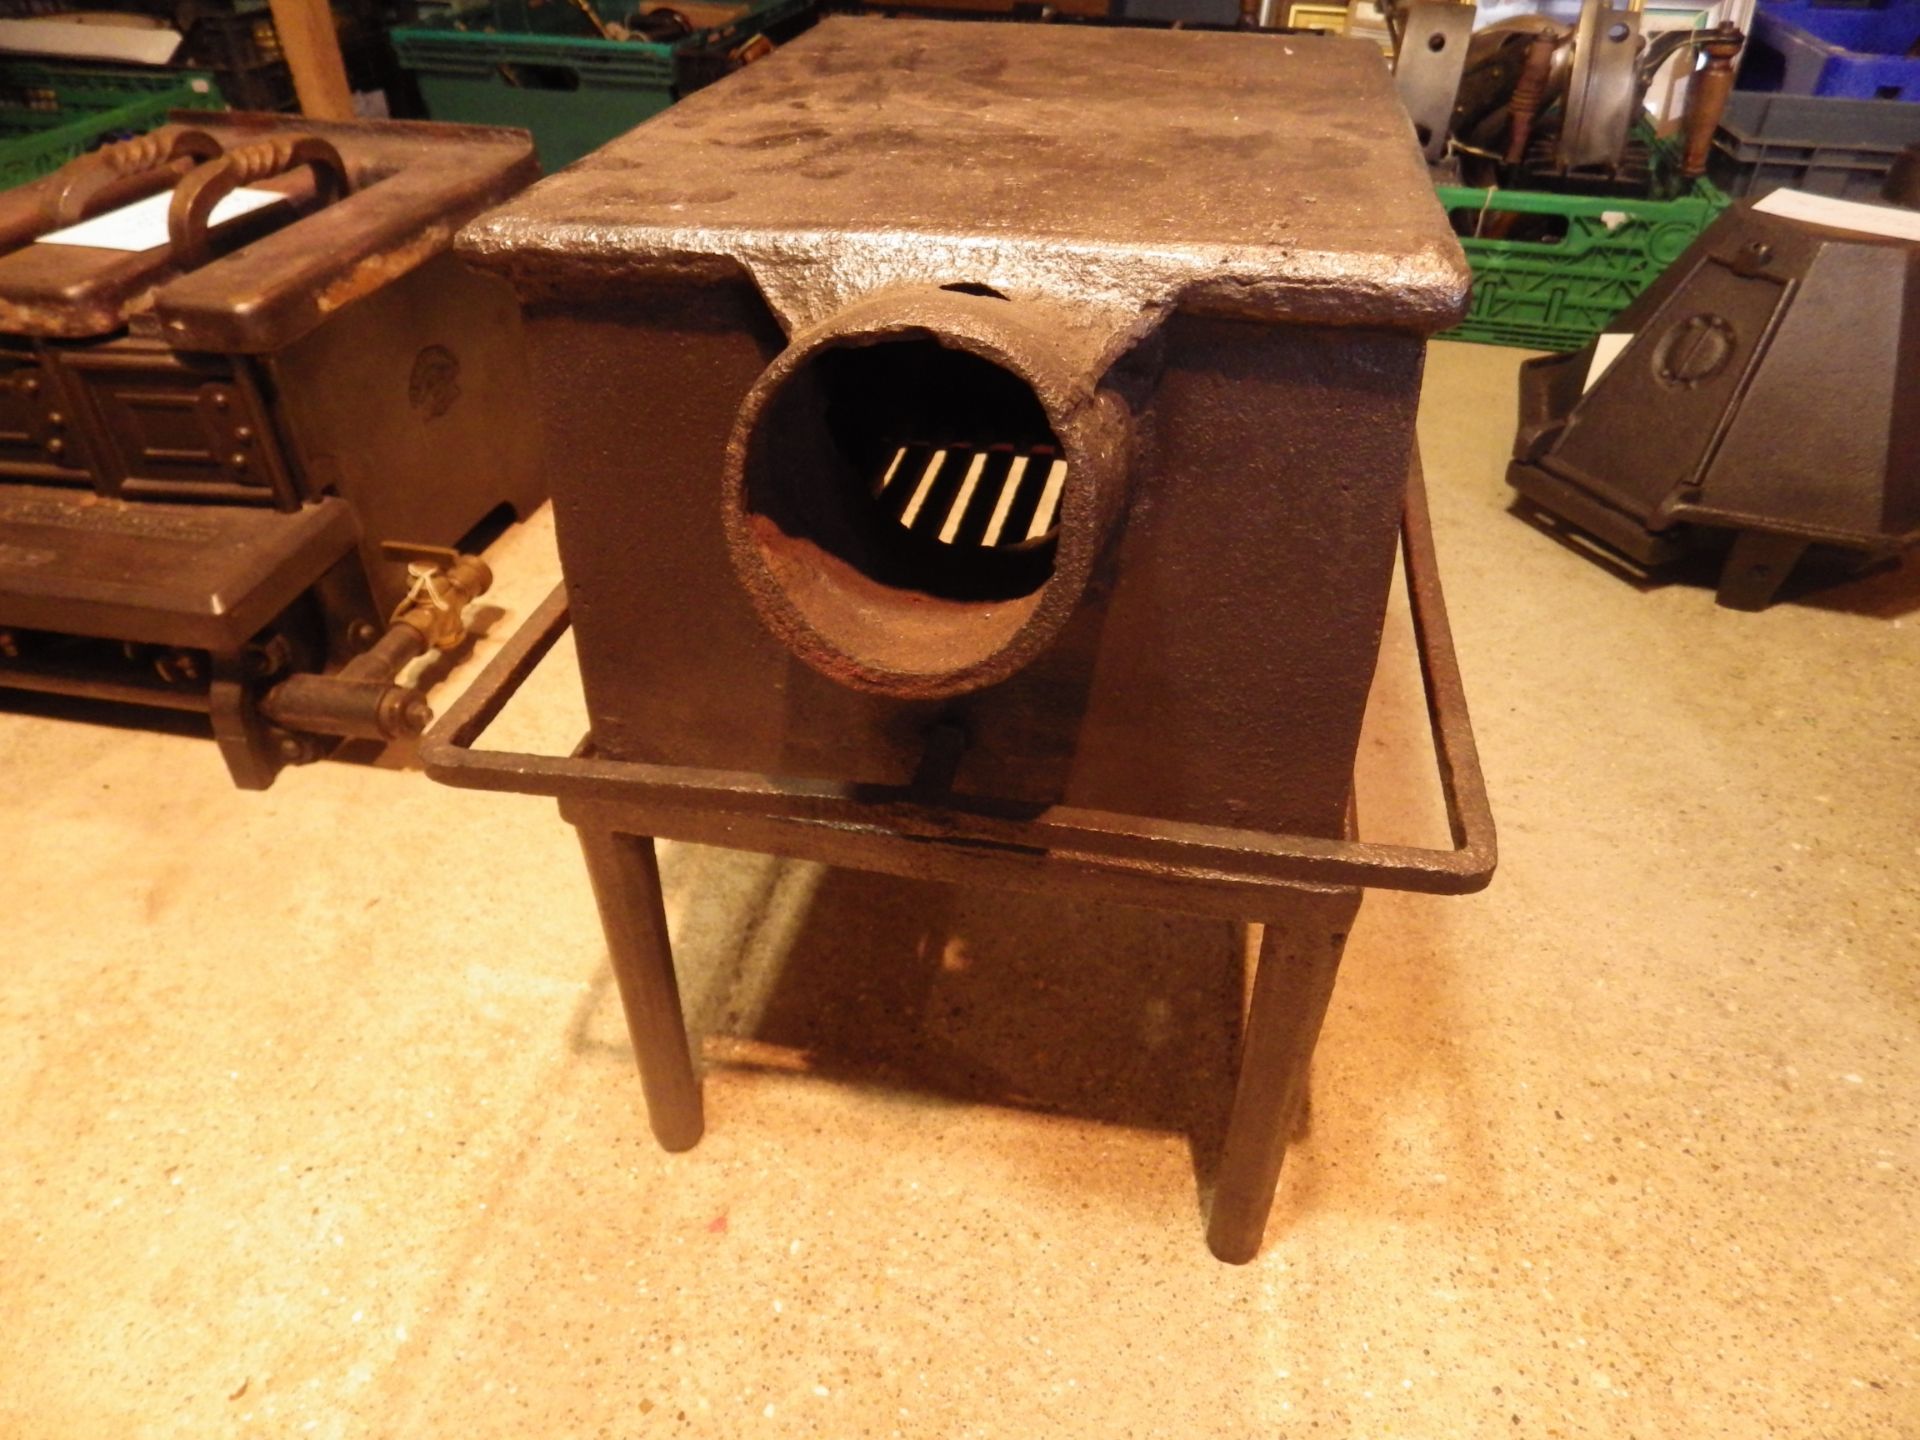 Large cast iron stove with grate and latch door on stand, stove is 34cm x 25cmx 19cm tall - Image 3 of 4